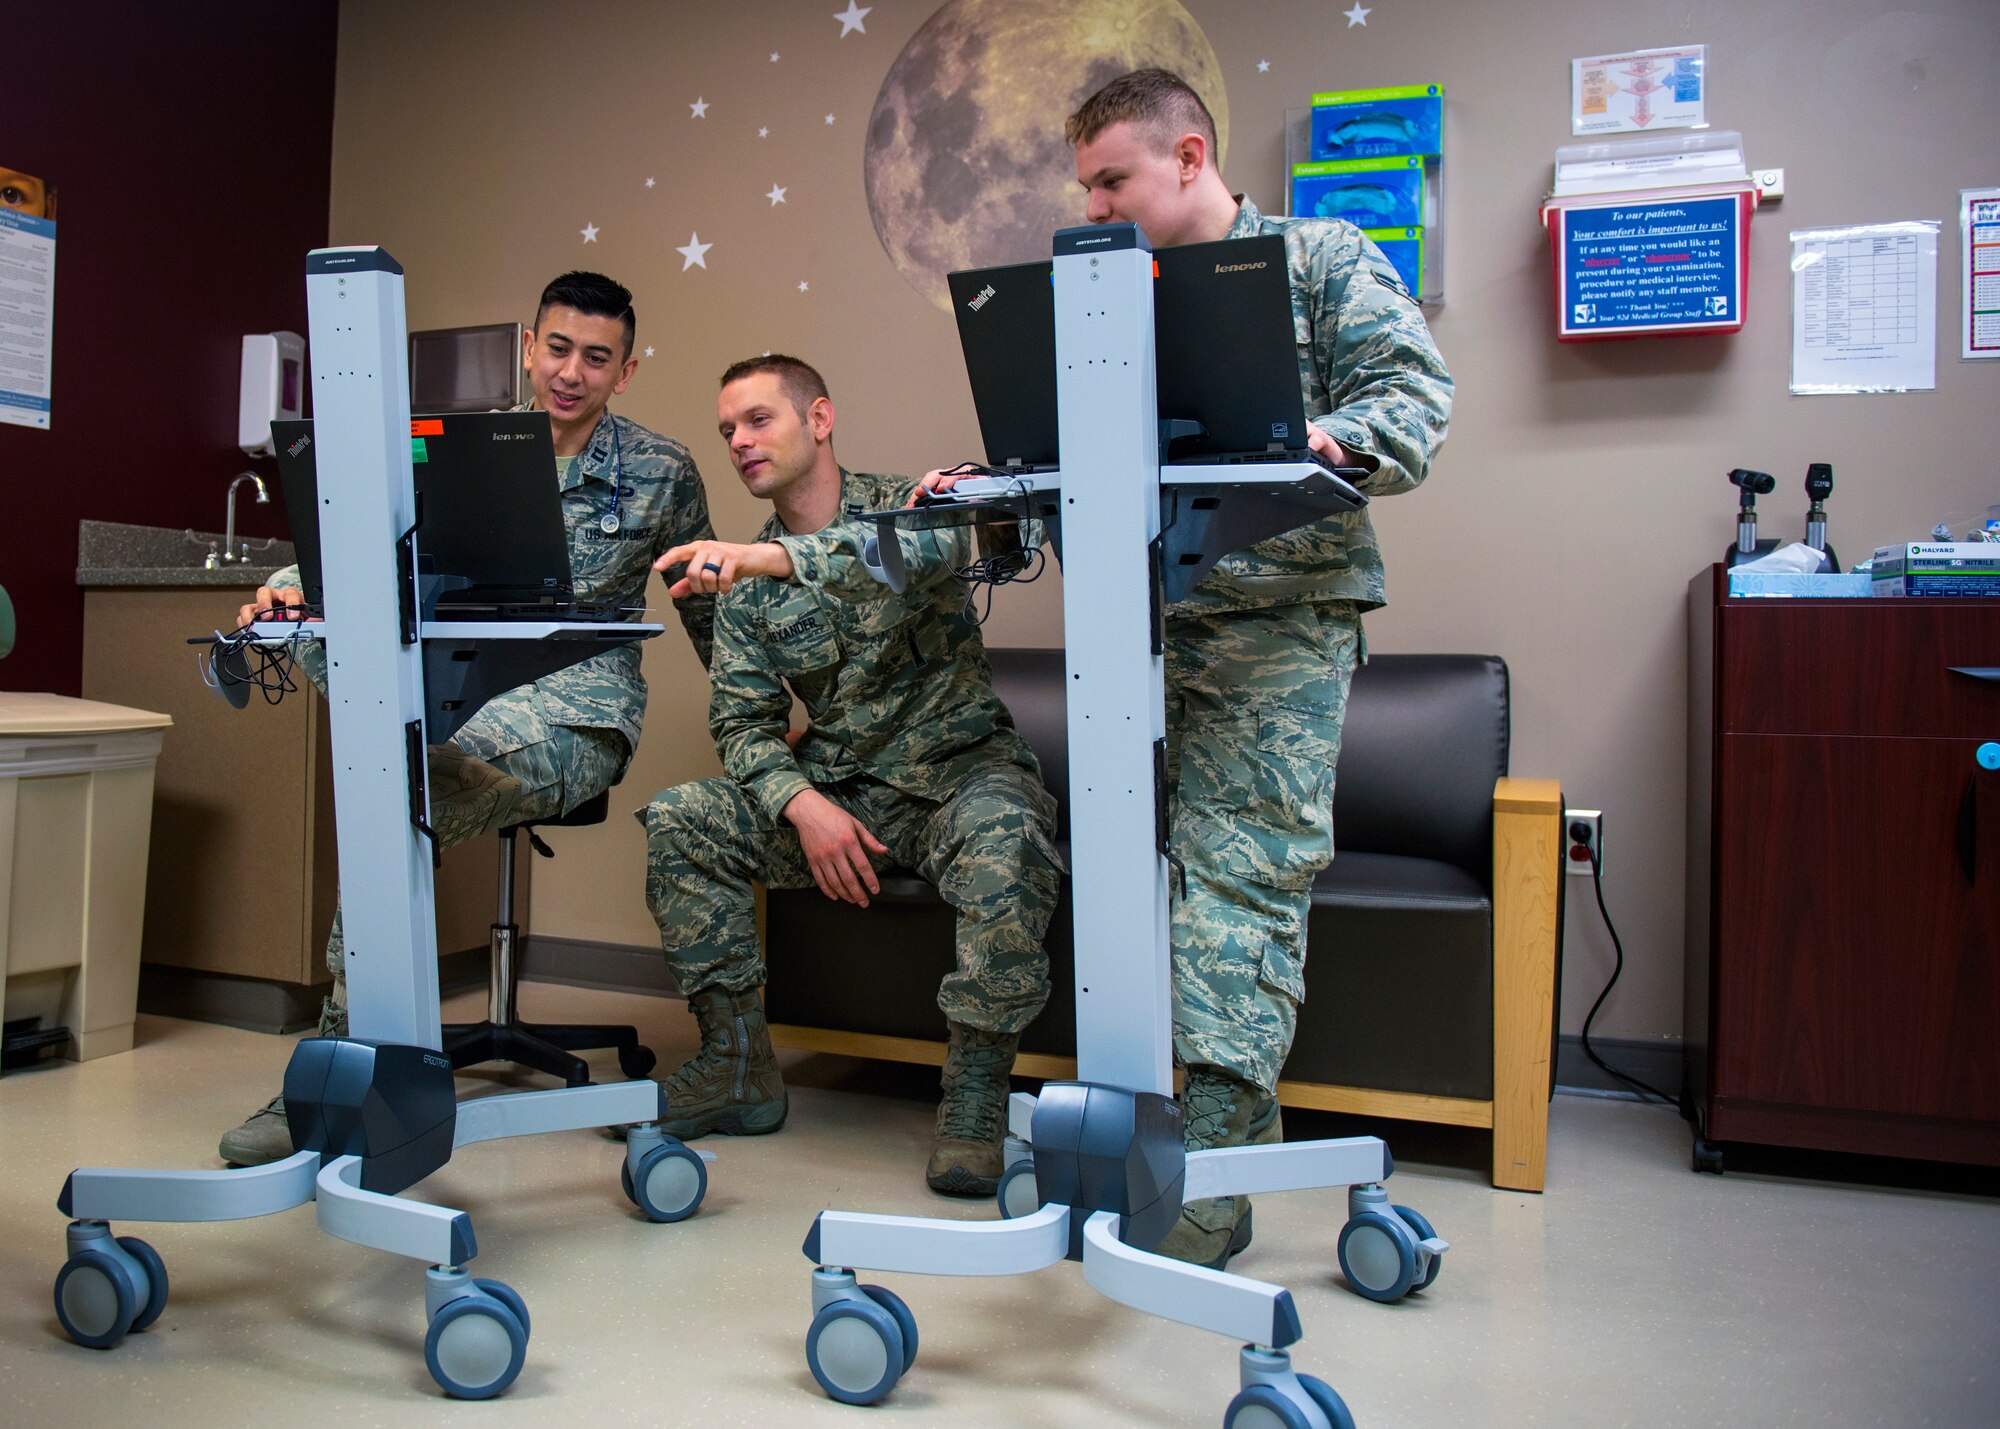 (from left) Capt. Joseph Migliuri, 92nd Medical Group pediatrician, Capt. Neal Alexander, 92nd MDG maternal child flight nurse manager, and Airman 1st Class Levi Brown, 92nd MDG aerospace medical technician, review patient medical records prior to an appointment at Fairchild Air Force Base, Wash., April 4, 2018. The pediatric team has implemented a new concept of operations: rewarding, efficiency, setting priorities and empowering team members, or RESET, to their system of patient care. Virtual appointments are offered to allow patients to receive the care they need from doctors without having to visit the clinic and has also allowed doctors to have more time to see more patients per day (U.S. Air Force photo by Airman 1st Class Whitney Laine)